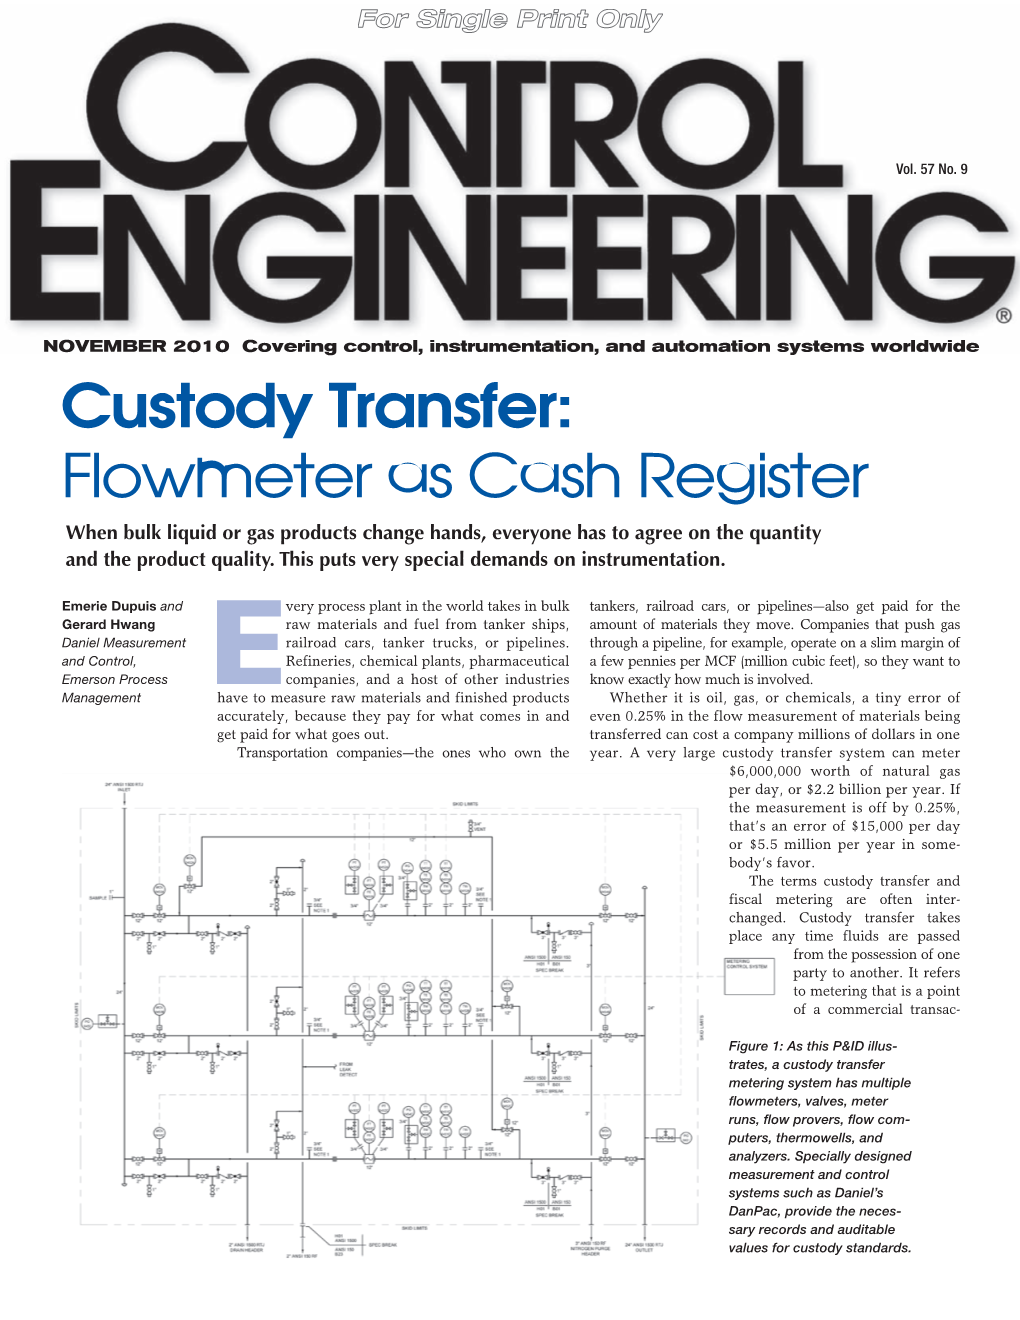 Custody Transfer: Flowmeter As Cash Register When Bulk Liquid Or Gas Products Change Hands, Everyone Has to Agree on the Quantity and the Product Quality